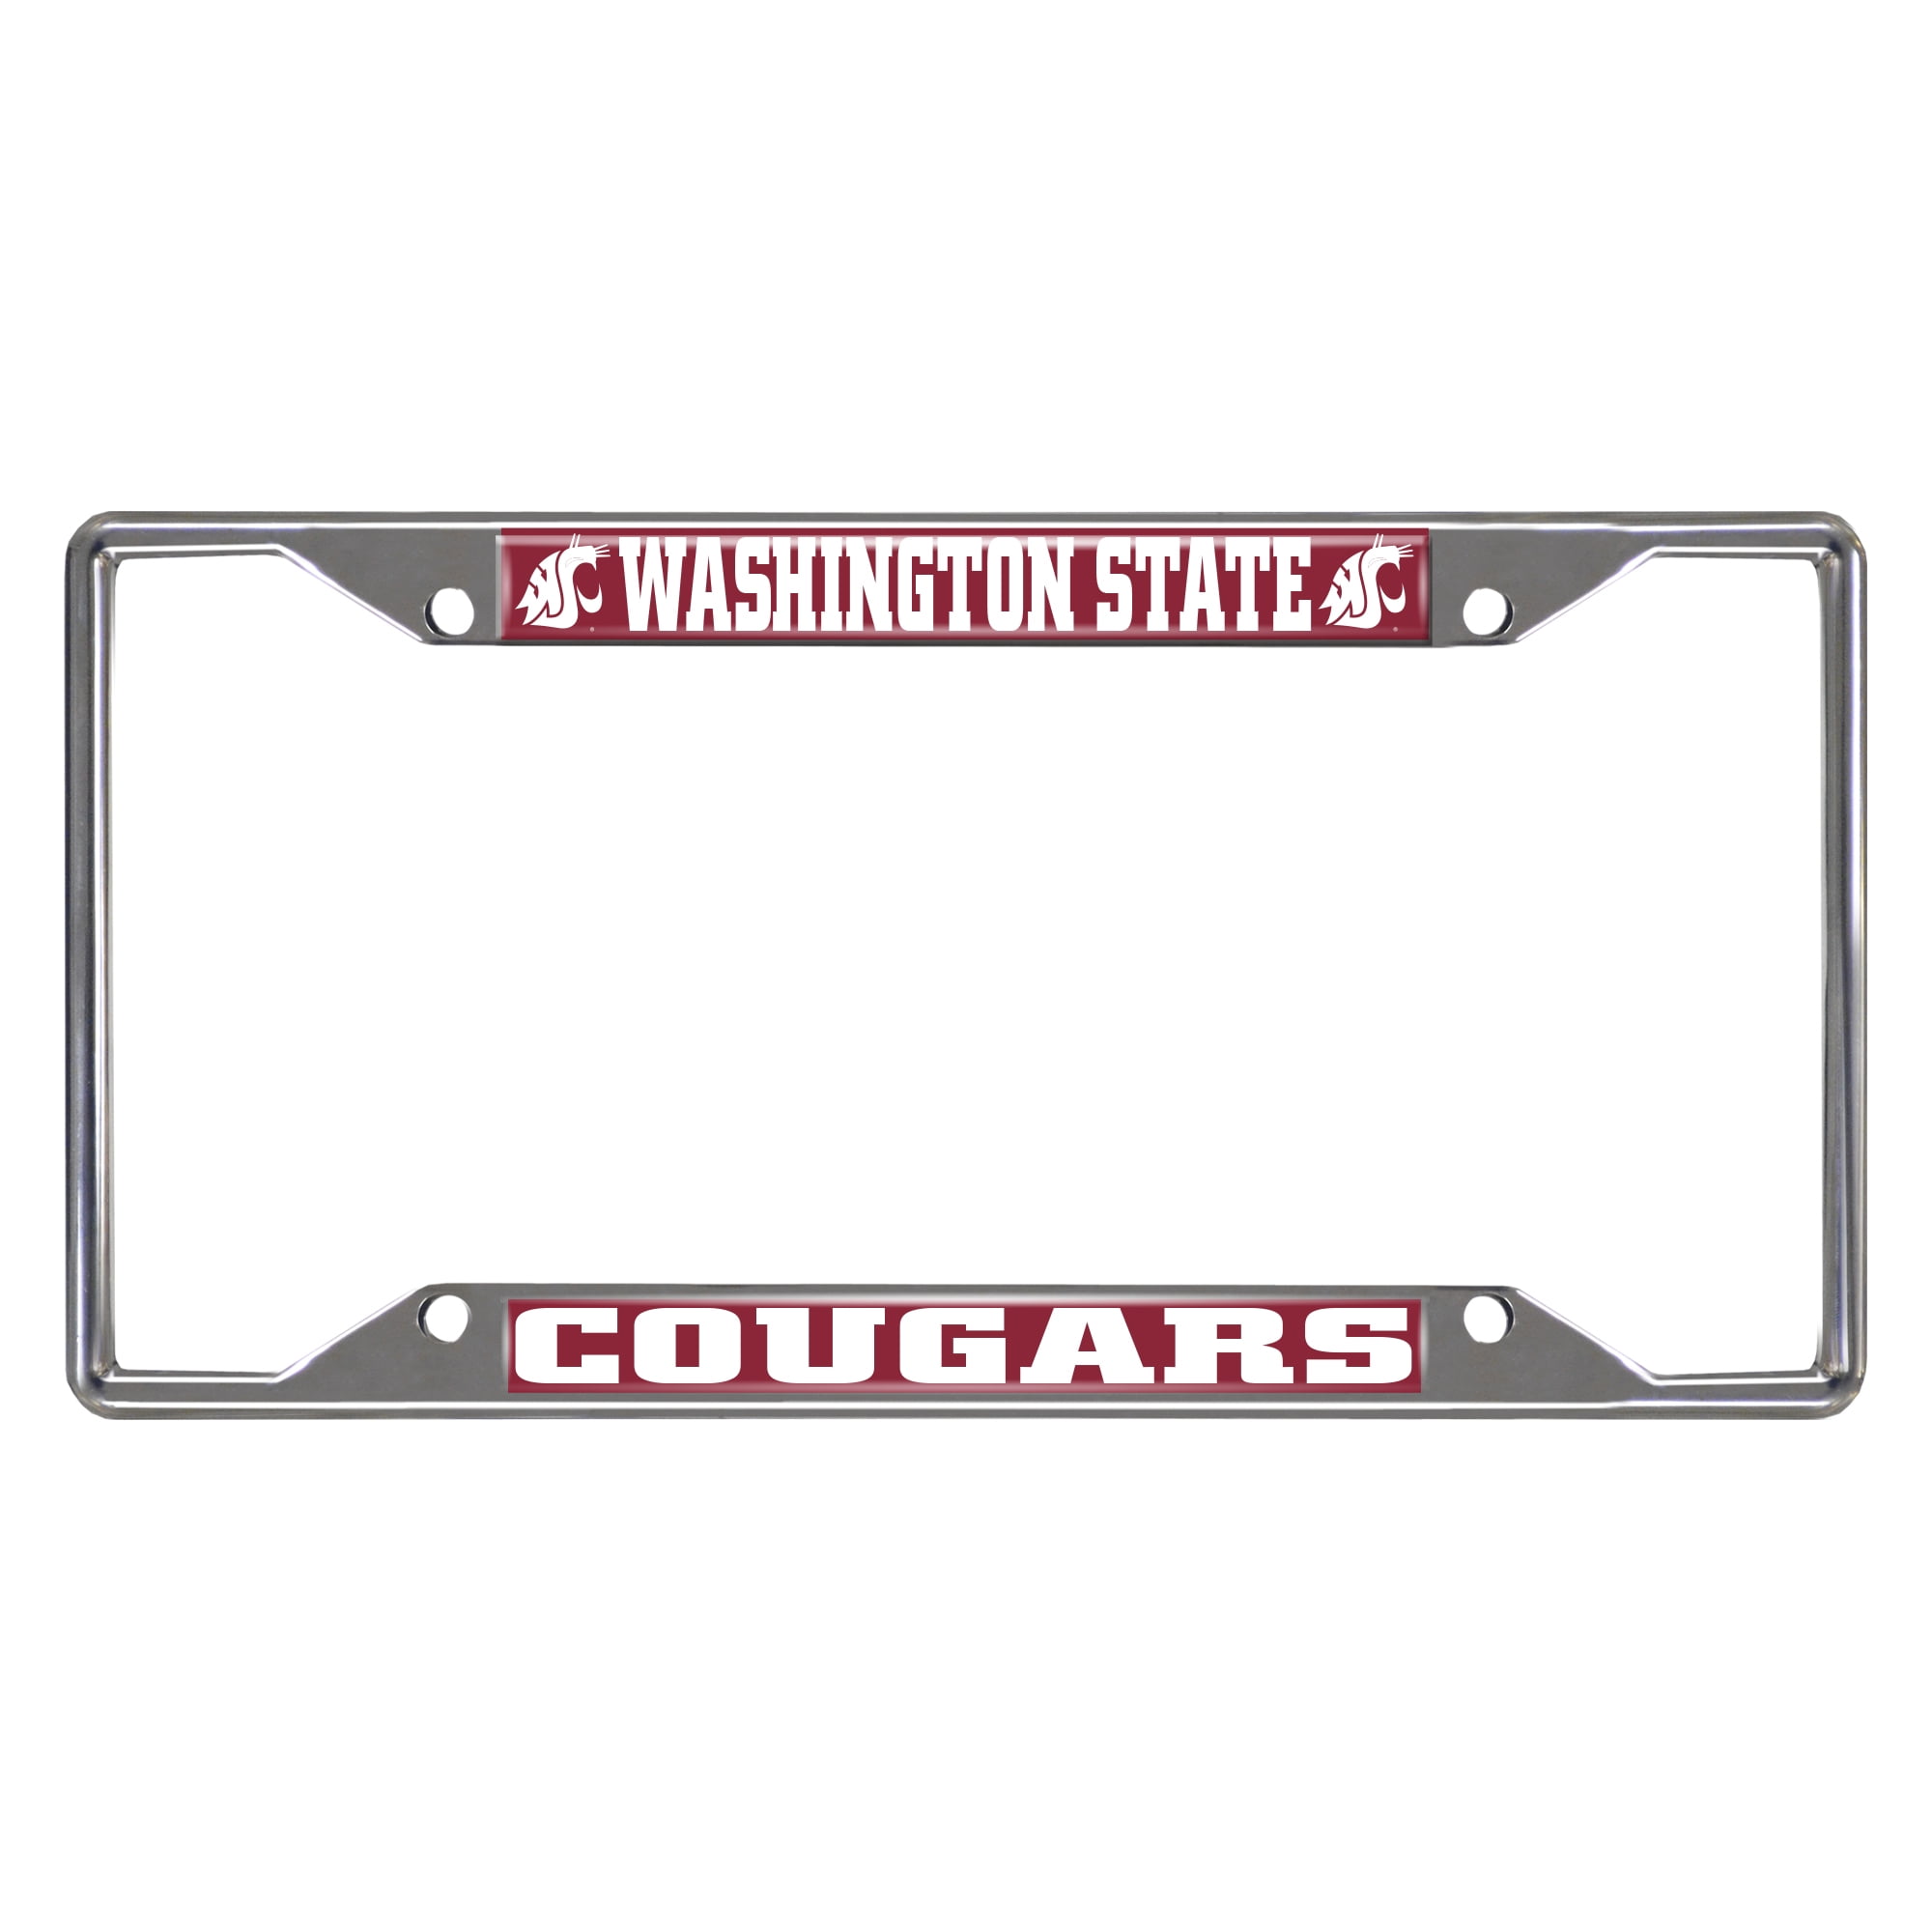 Washington State University Metal License Plate Frame for Front or Back of Car Officially Licensed Mascot